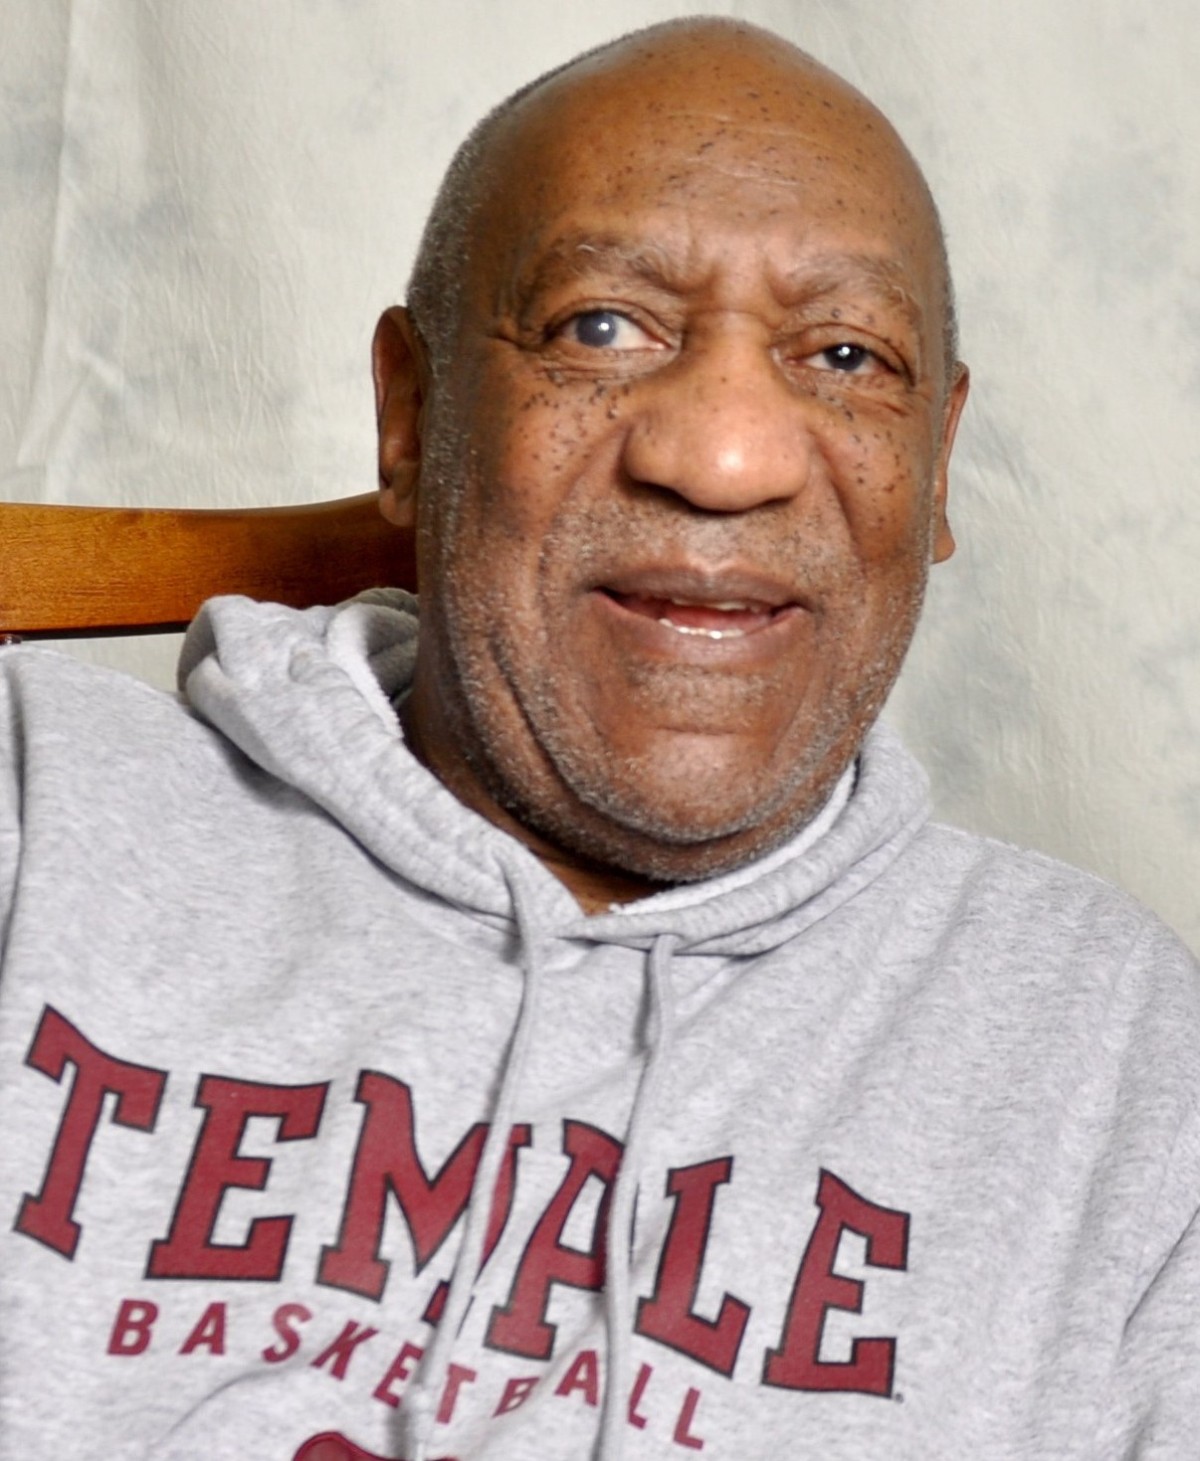 BREAKING NEWS! Bill Cosby  (@BillCosby) Said He Bought Drugs to Give Women for Sex!